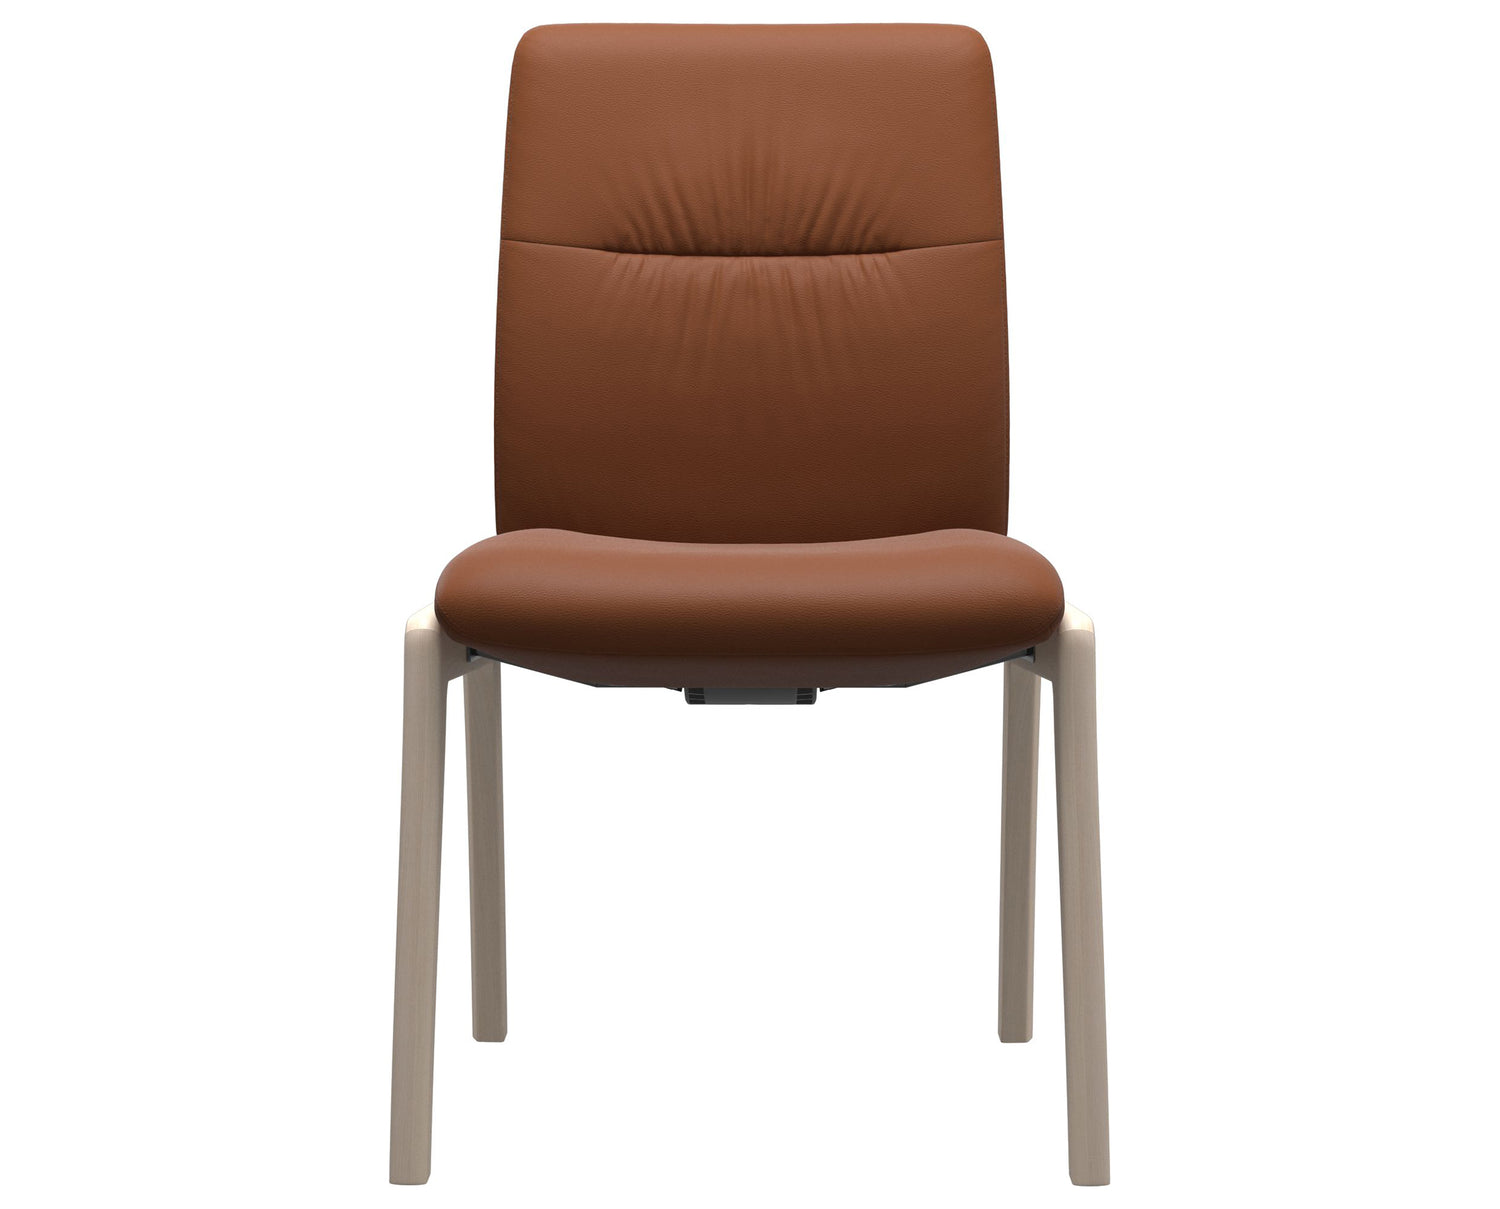 Paloma Leather New Cognac & Whitewash Base | Stressless Mint Low Back D100 Dining Chair | Valley Ridge Furniture